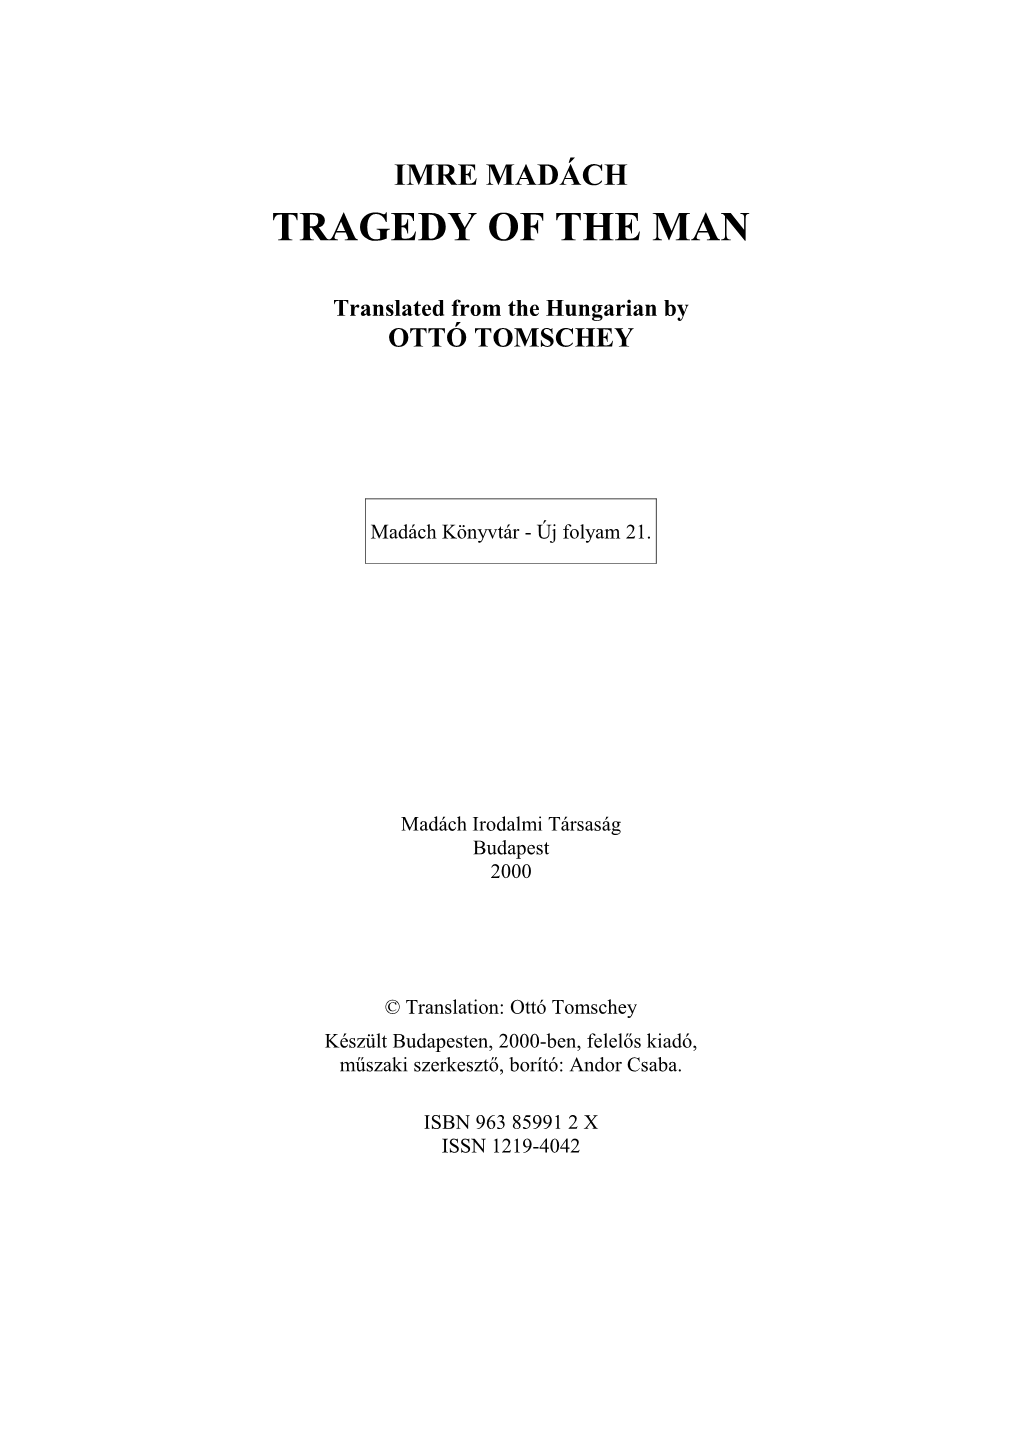 Tragedy of the Man